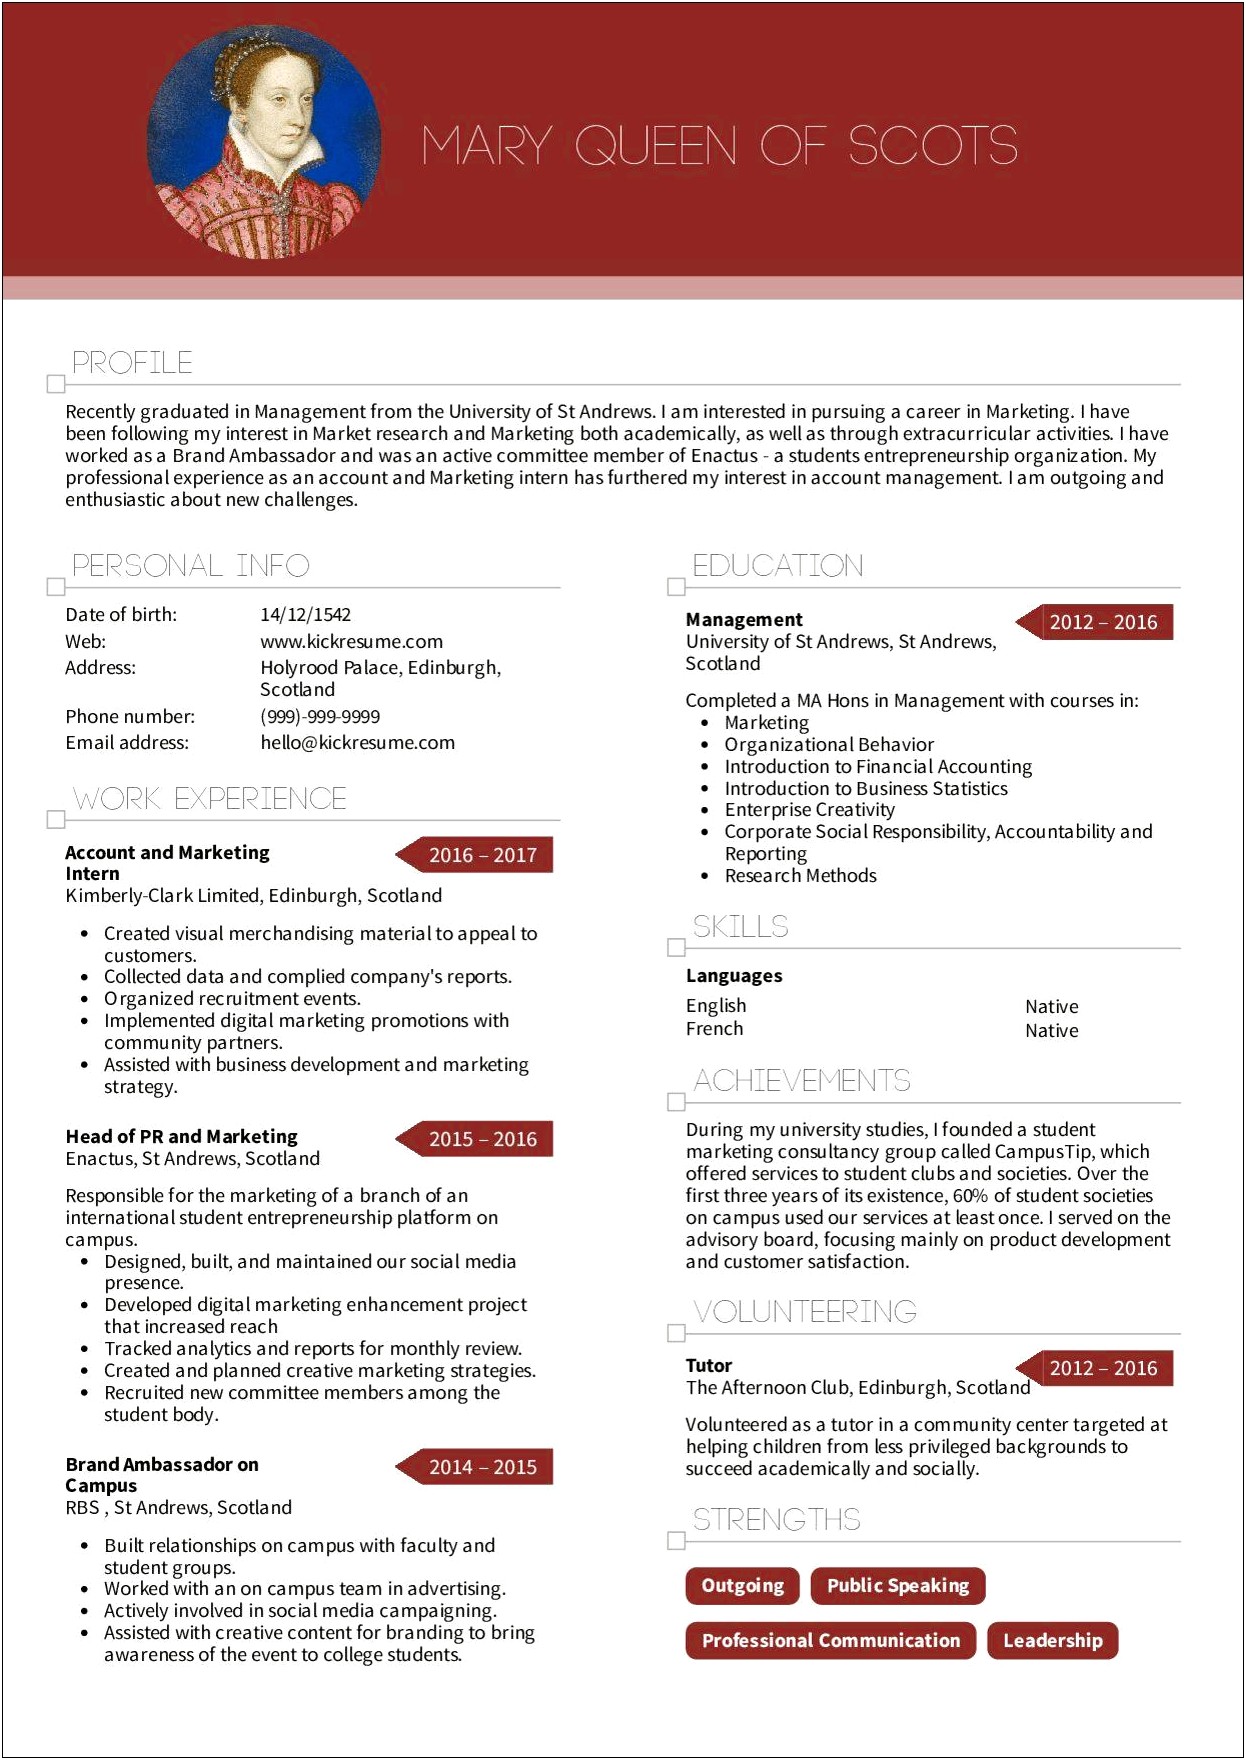 Uf Career Connections Center Resume Sample